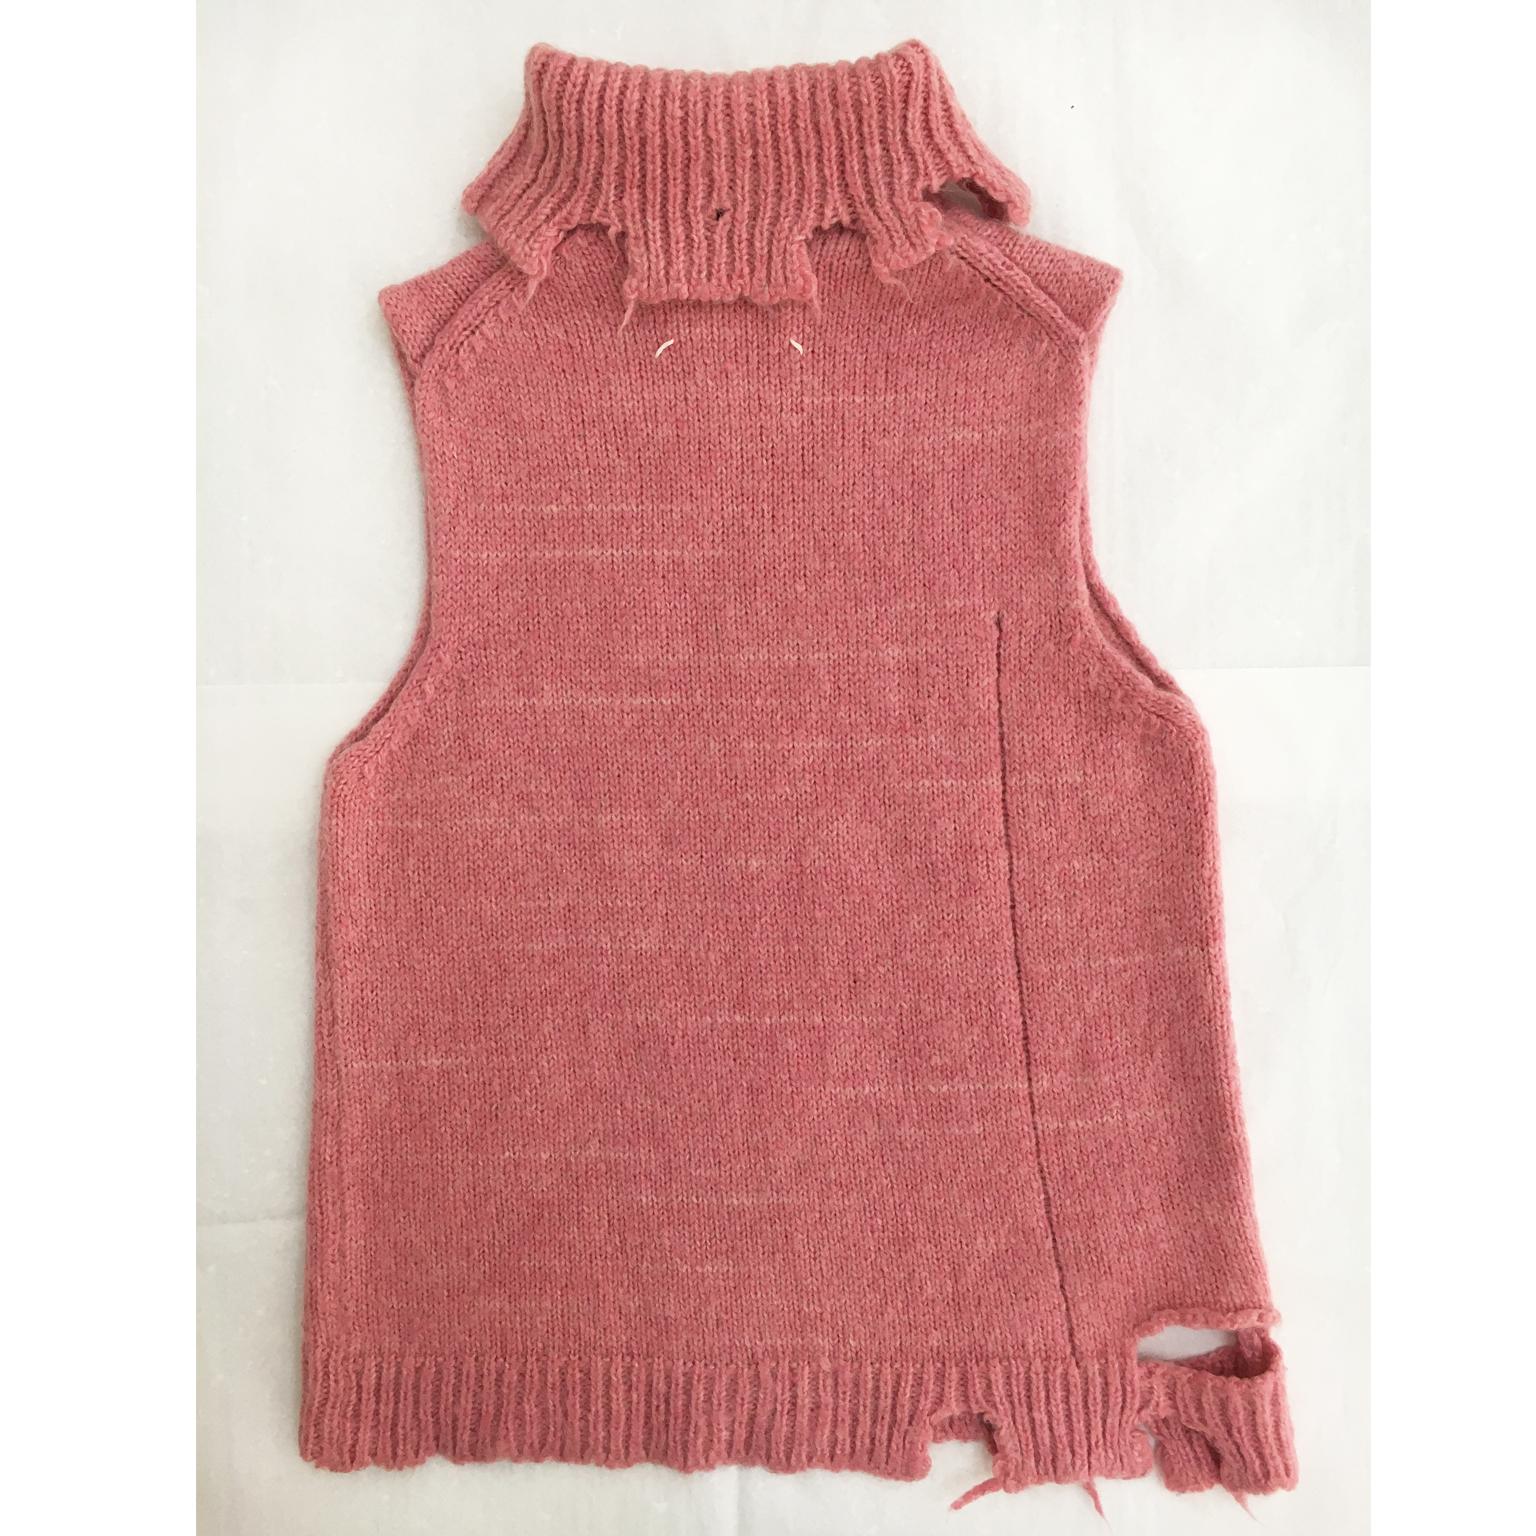 Maison Martin Margiela destroyed pink sleeveless knit from collection A/F 2000.
All the destroyed wholes including on the front panel are secured as part of the design. 
Shoulder : 37 cm
Back length 67 cm
Underarm : 42 cm
